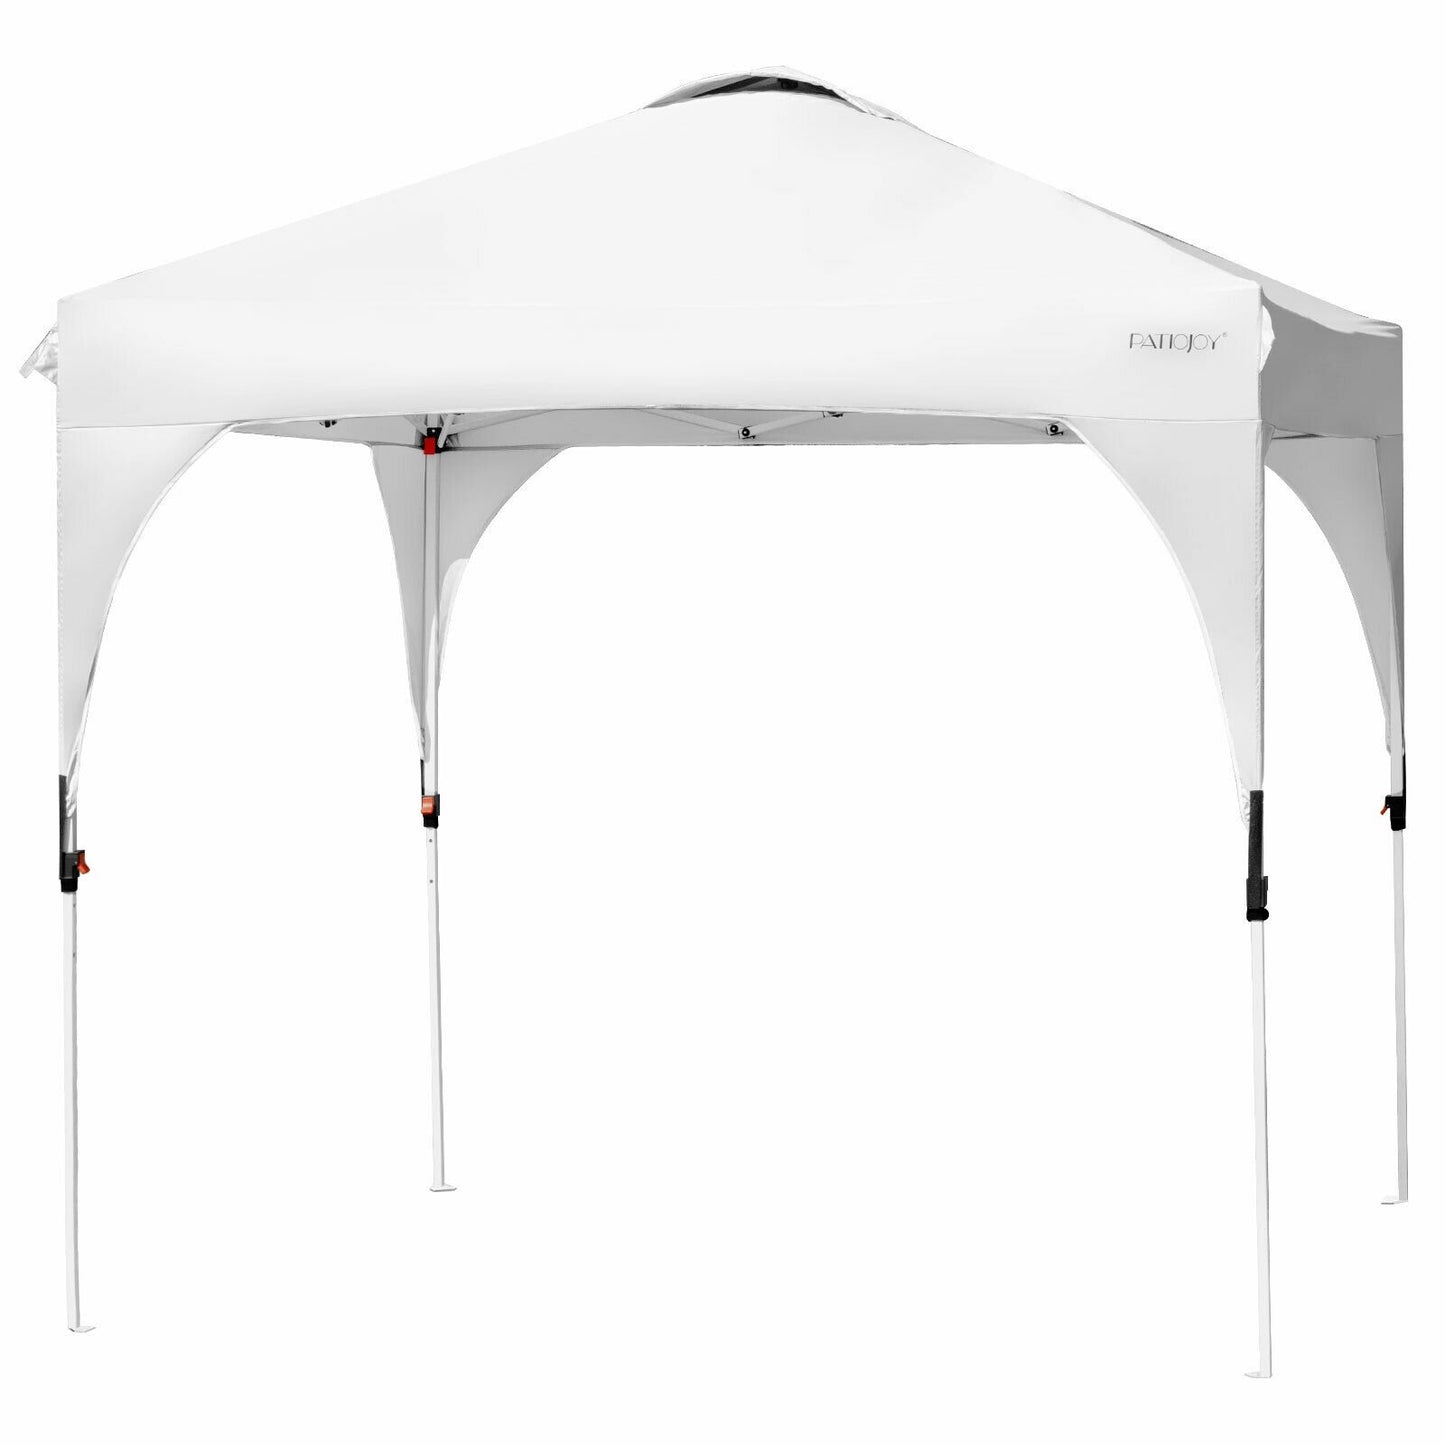 8 Feet x 8 Feet Outdoor Pop Up Tent Canopy Camping Sun Shelter with Roller Bag, White